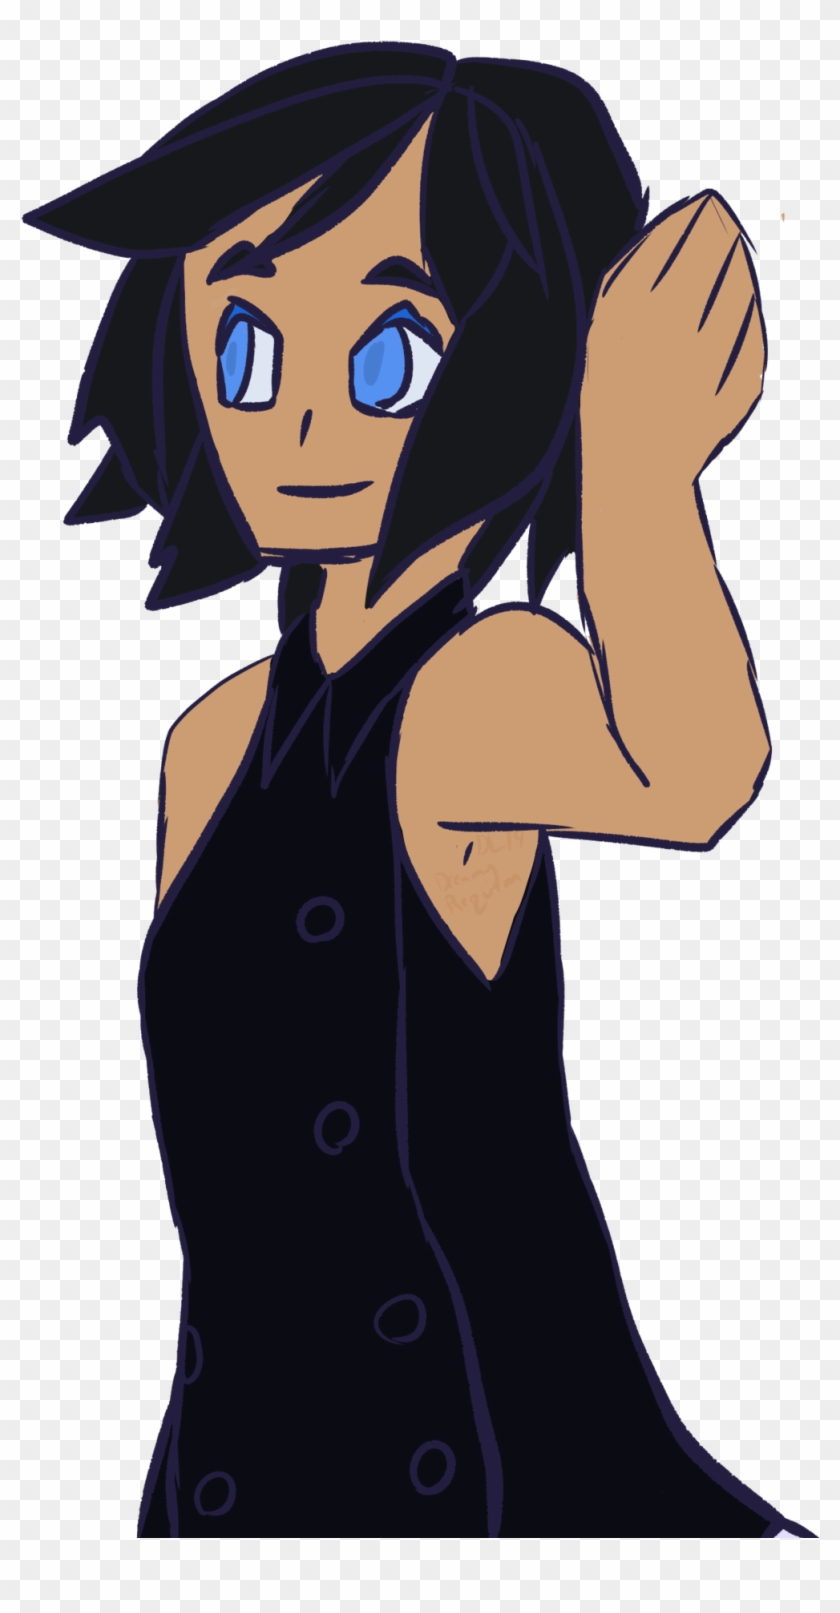 Kingdom Hearts 3 Xion Doodle To Celebrate My New Tablet - Cartoon Clipart #3702680